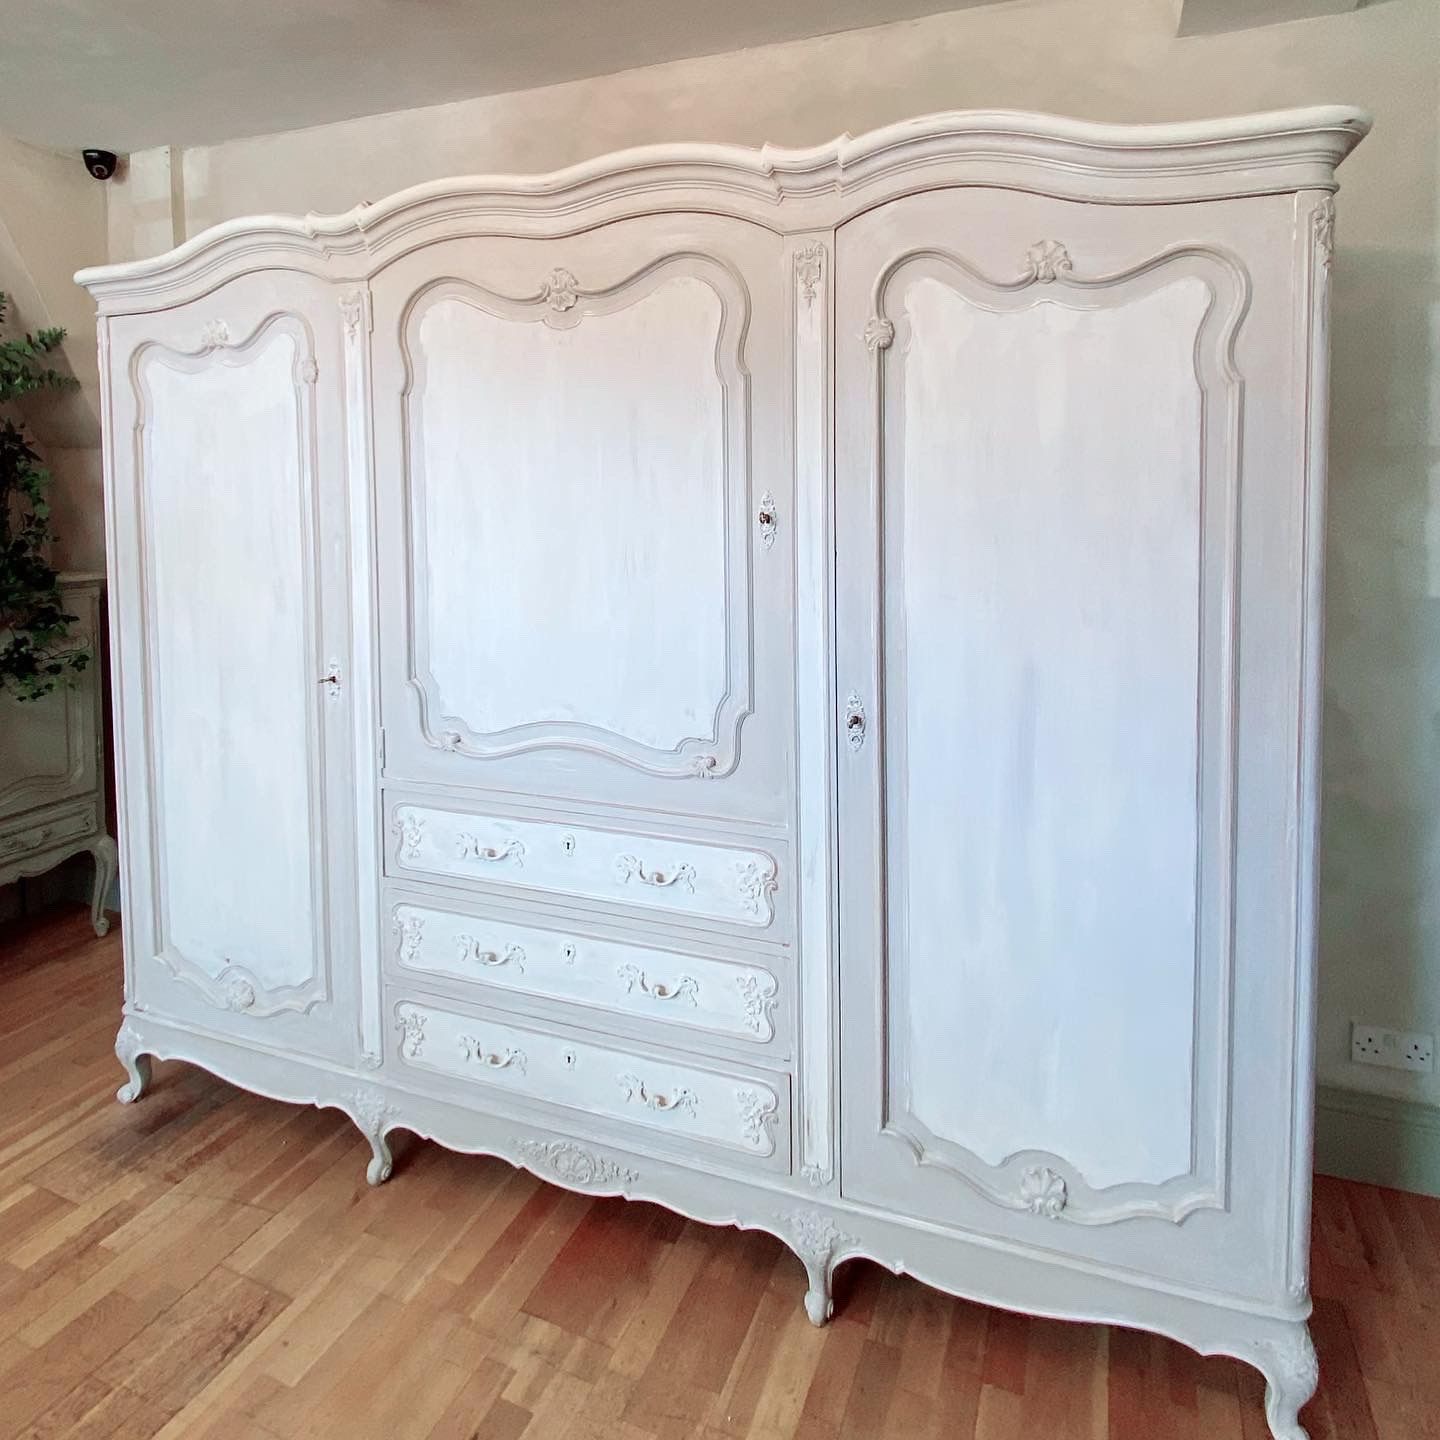 French 3 Door Armoire | Village Chic Throughout 3 Door French Wardrobes (Gallery 3 of 20)